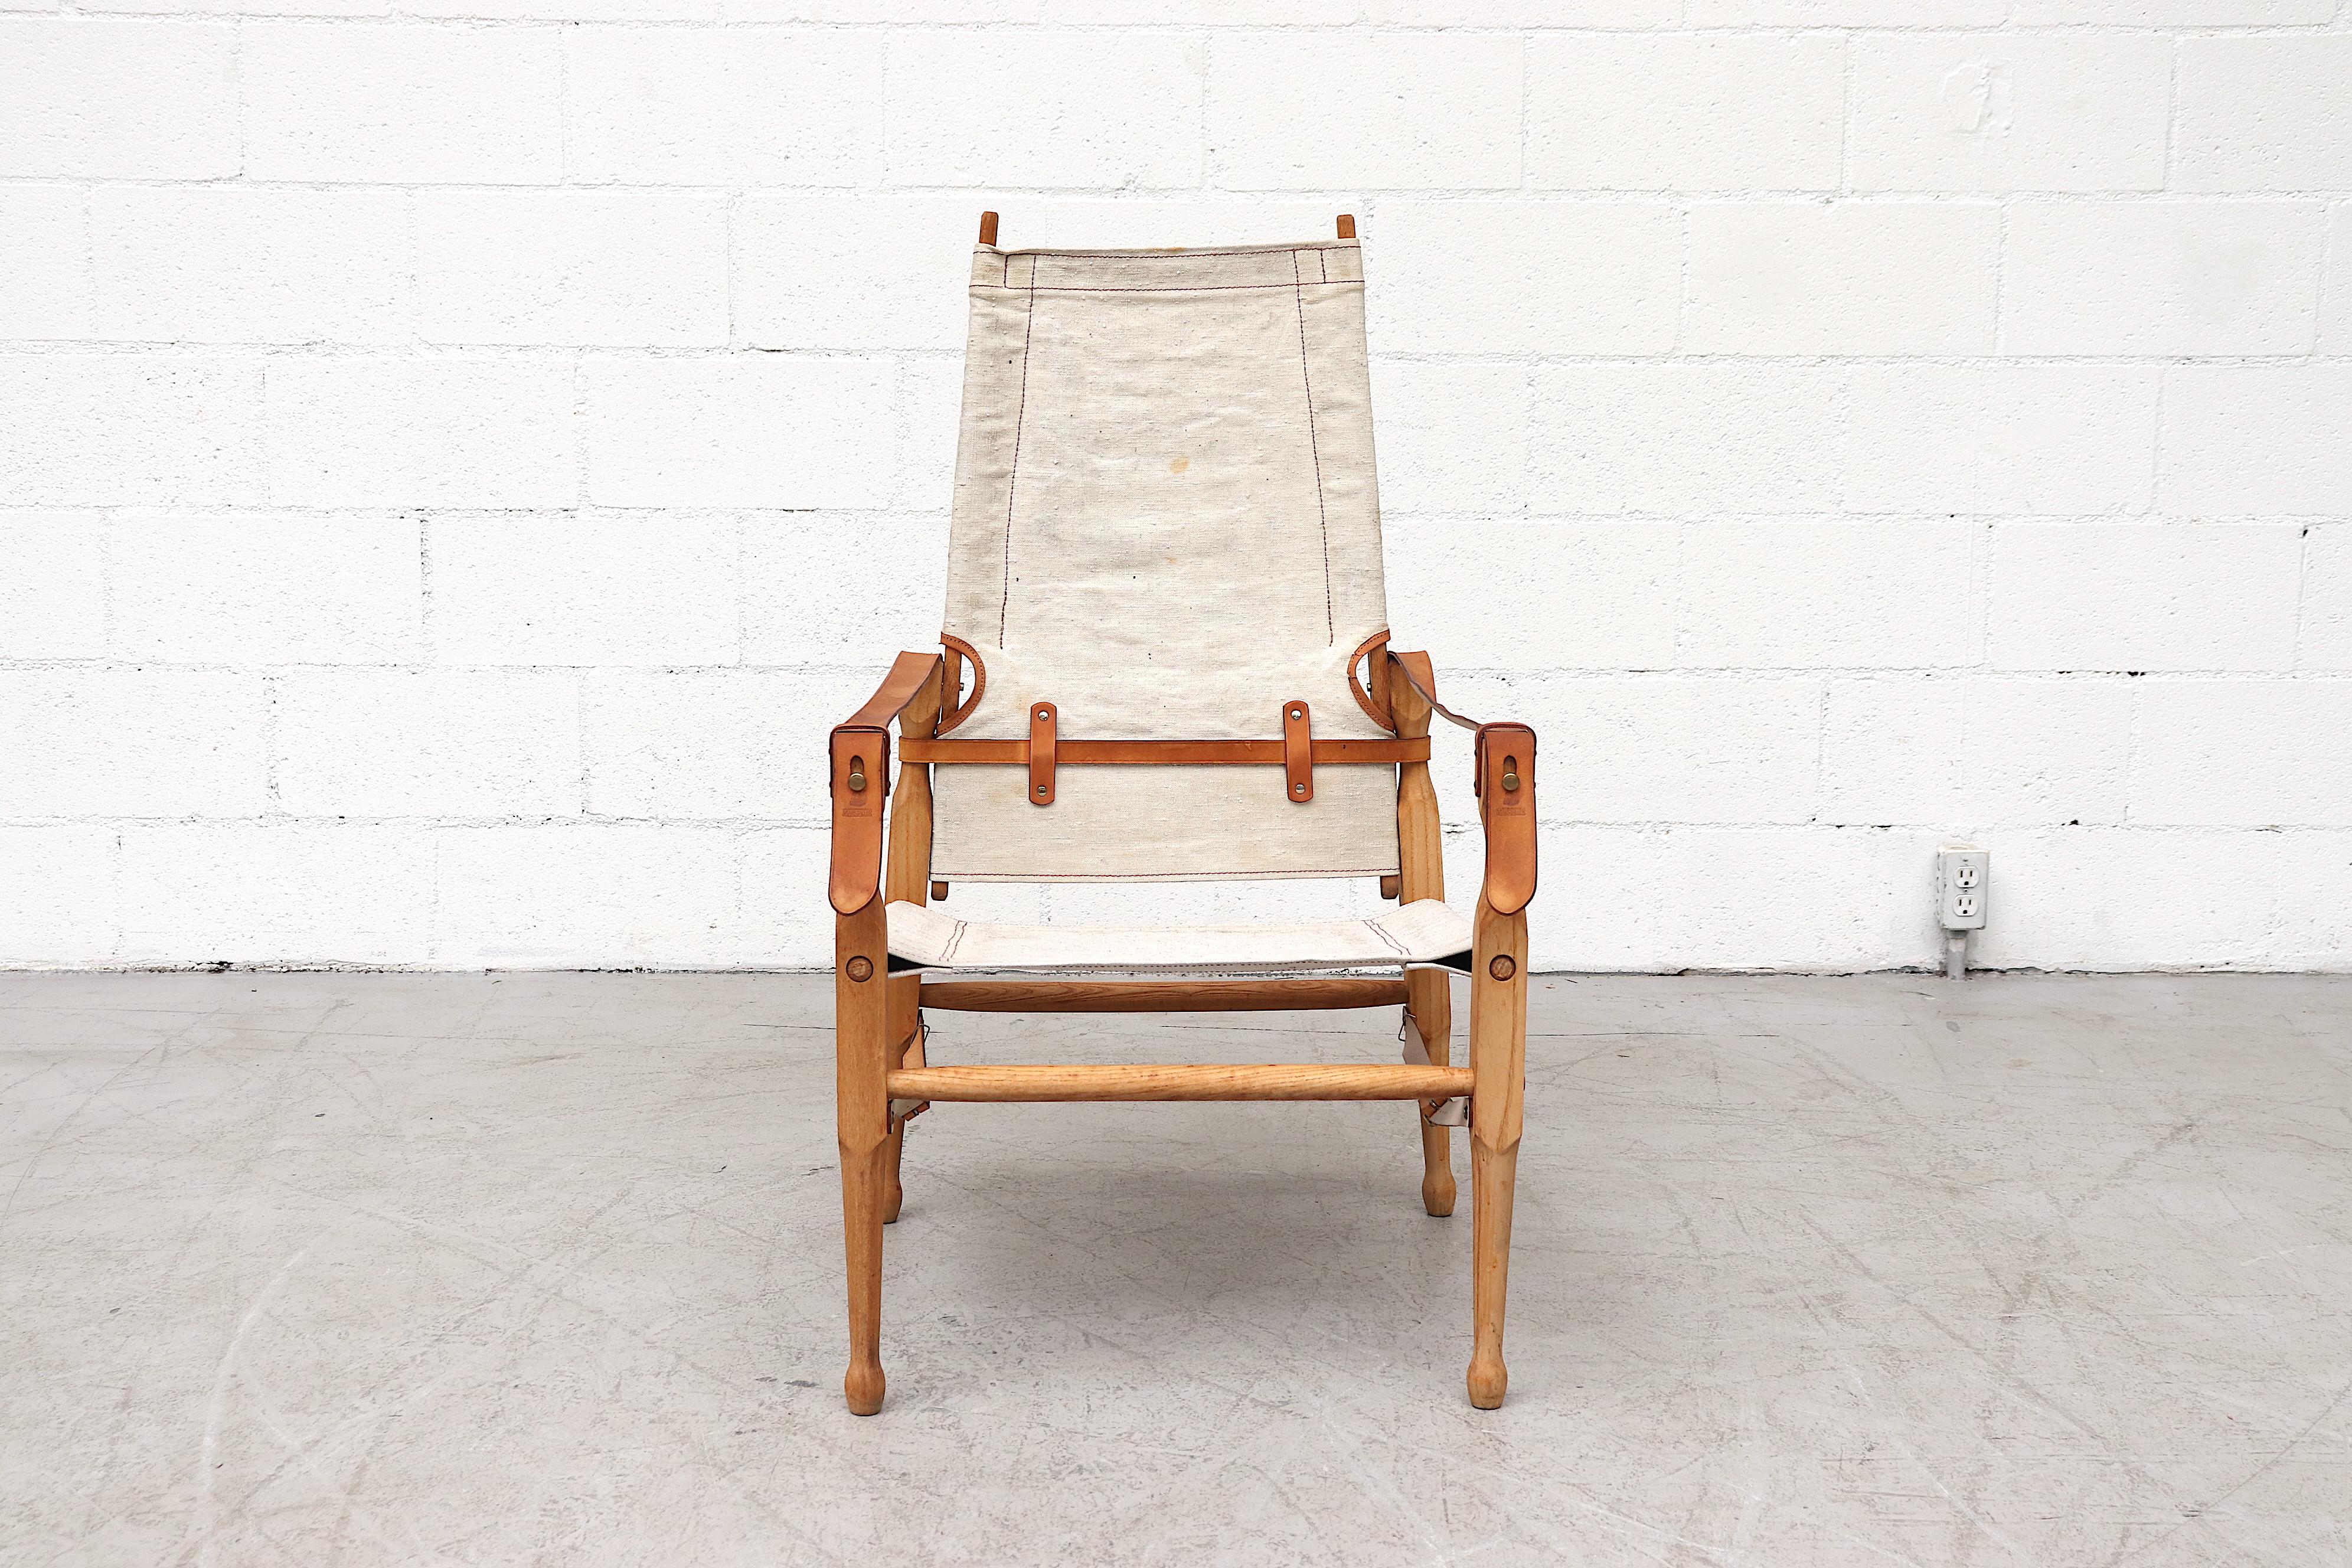 Attractive Kaare Klint style wood and canvas safari chair with leather strap arm rests and accents. In original condition with delicate elegance and effortless style. Visible wear to frame, canvas and leather. Wear is consistent with its age and use.